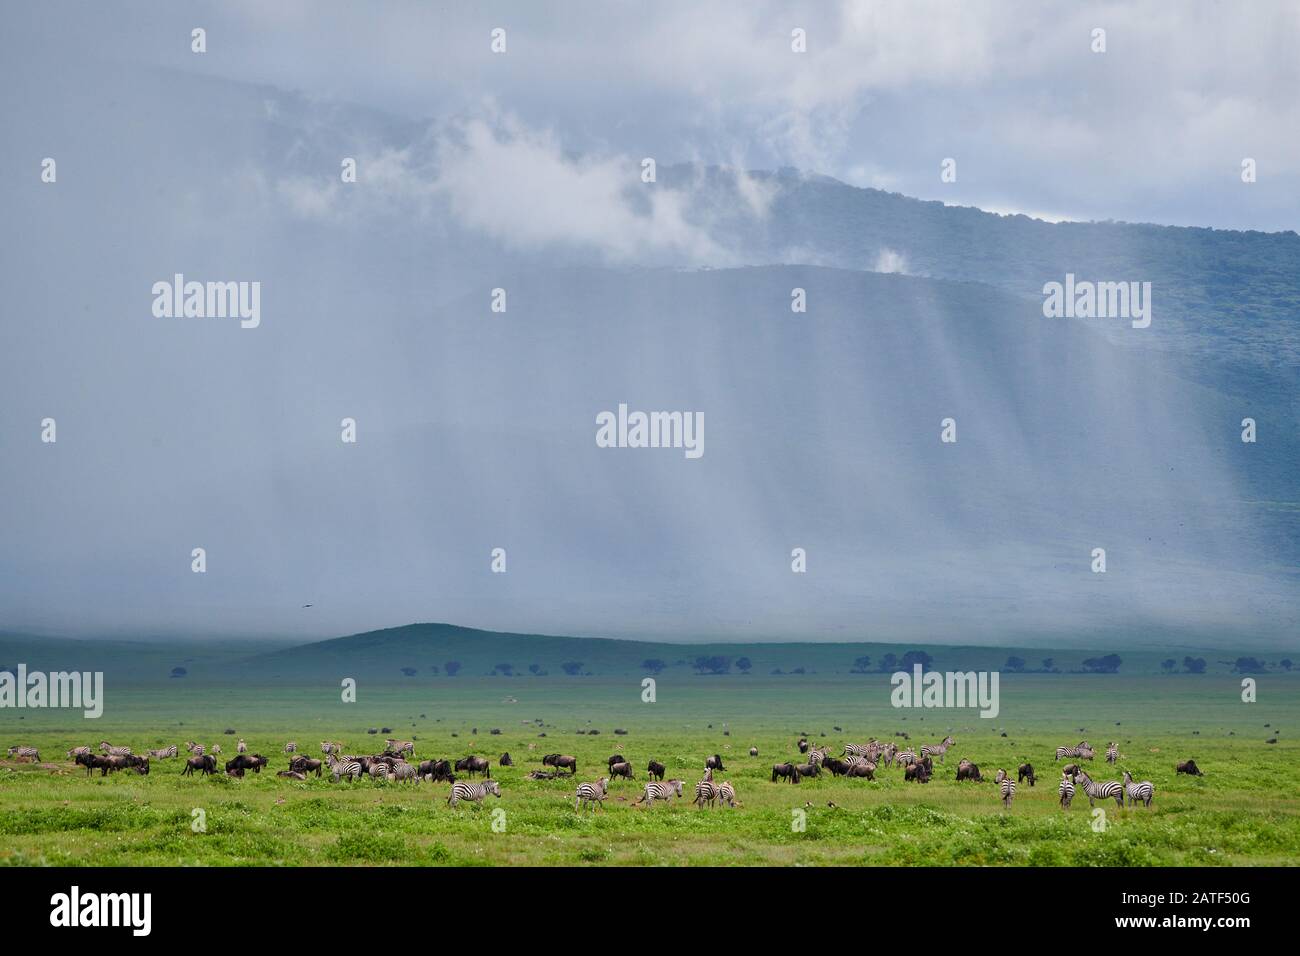 Crater landscape with rain clouds and herd of wildebeest and zebras,  Ngorongoro Conservation Area, Tanzania, Africa Stock Photo